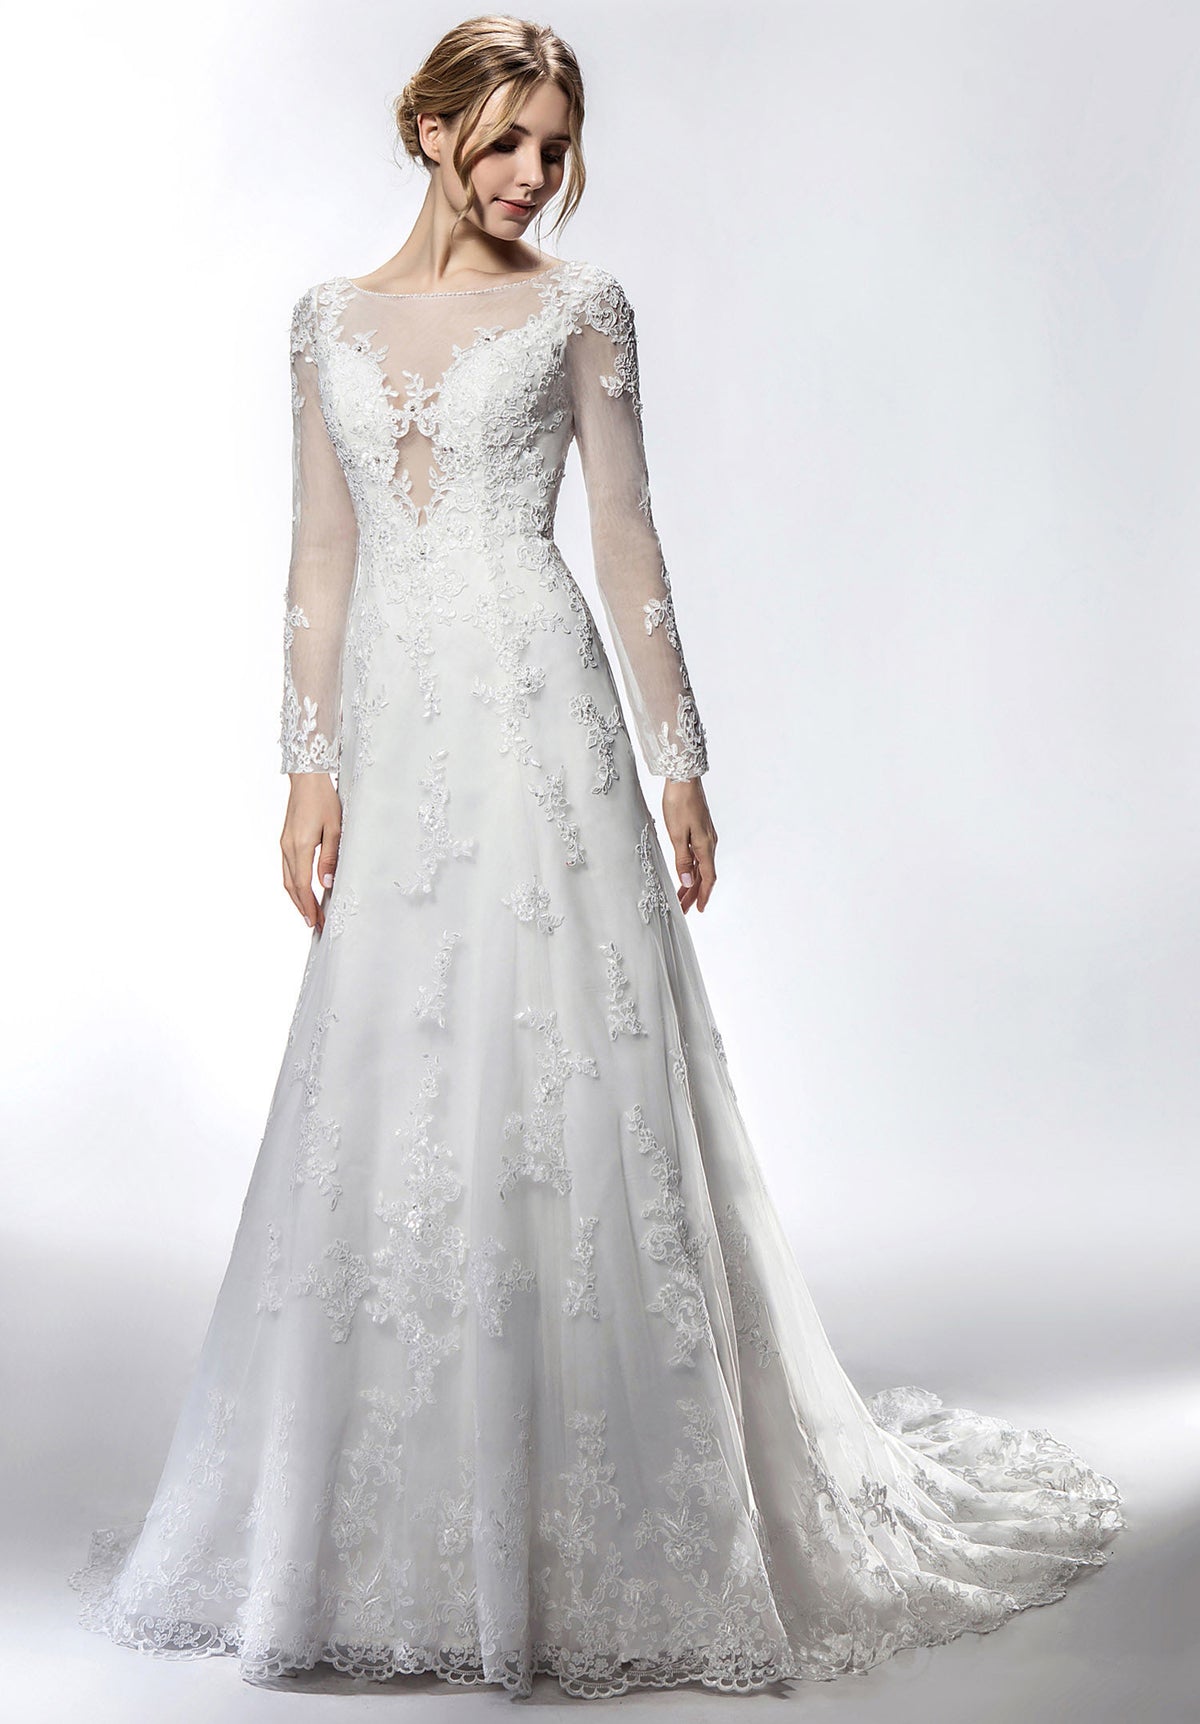 Princess Plunging Neckline Long Sleeve Aline Wedding Dress As Picture